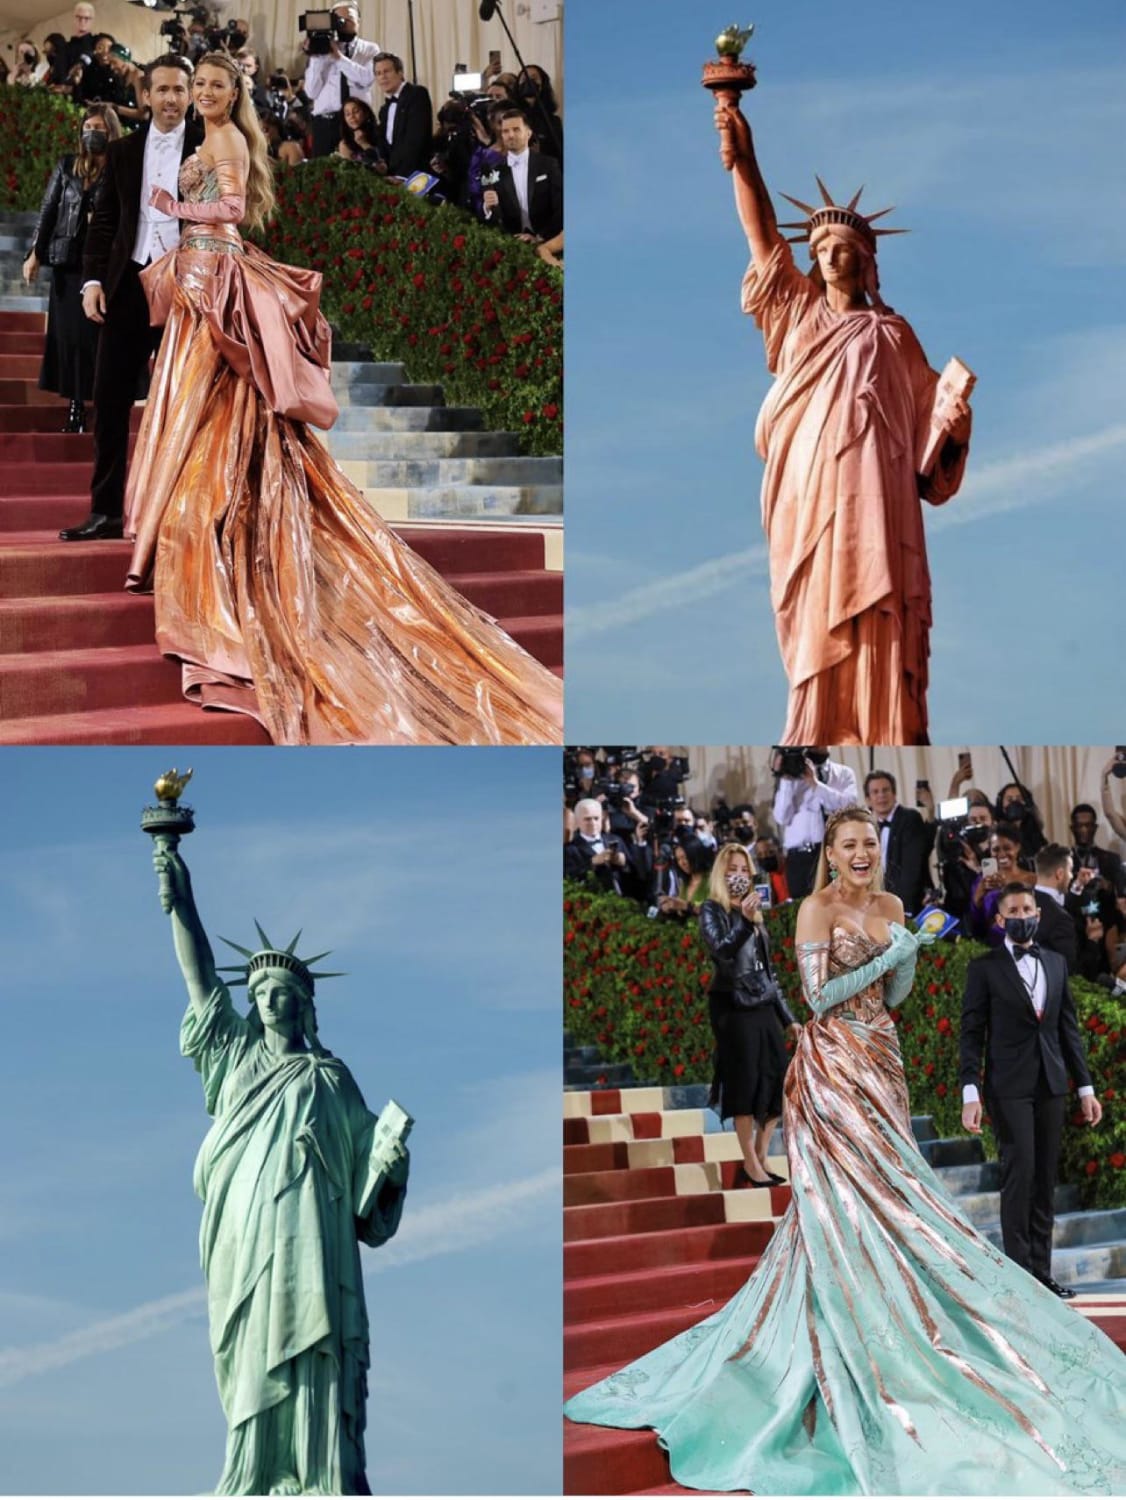 Blake Lively’s MetGala look is inspired by the Statue of Liberty which was once copper and soon turned green as a result of the oxidation process